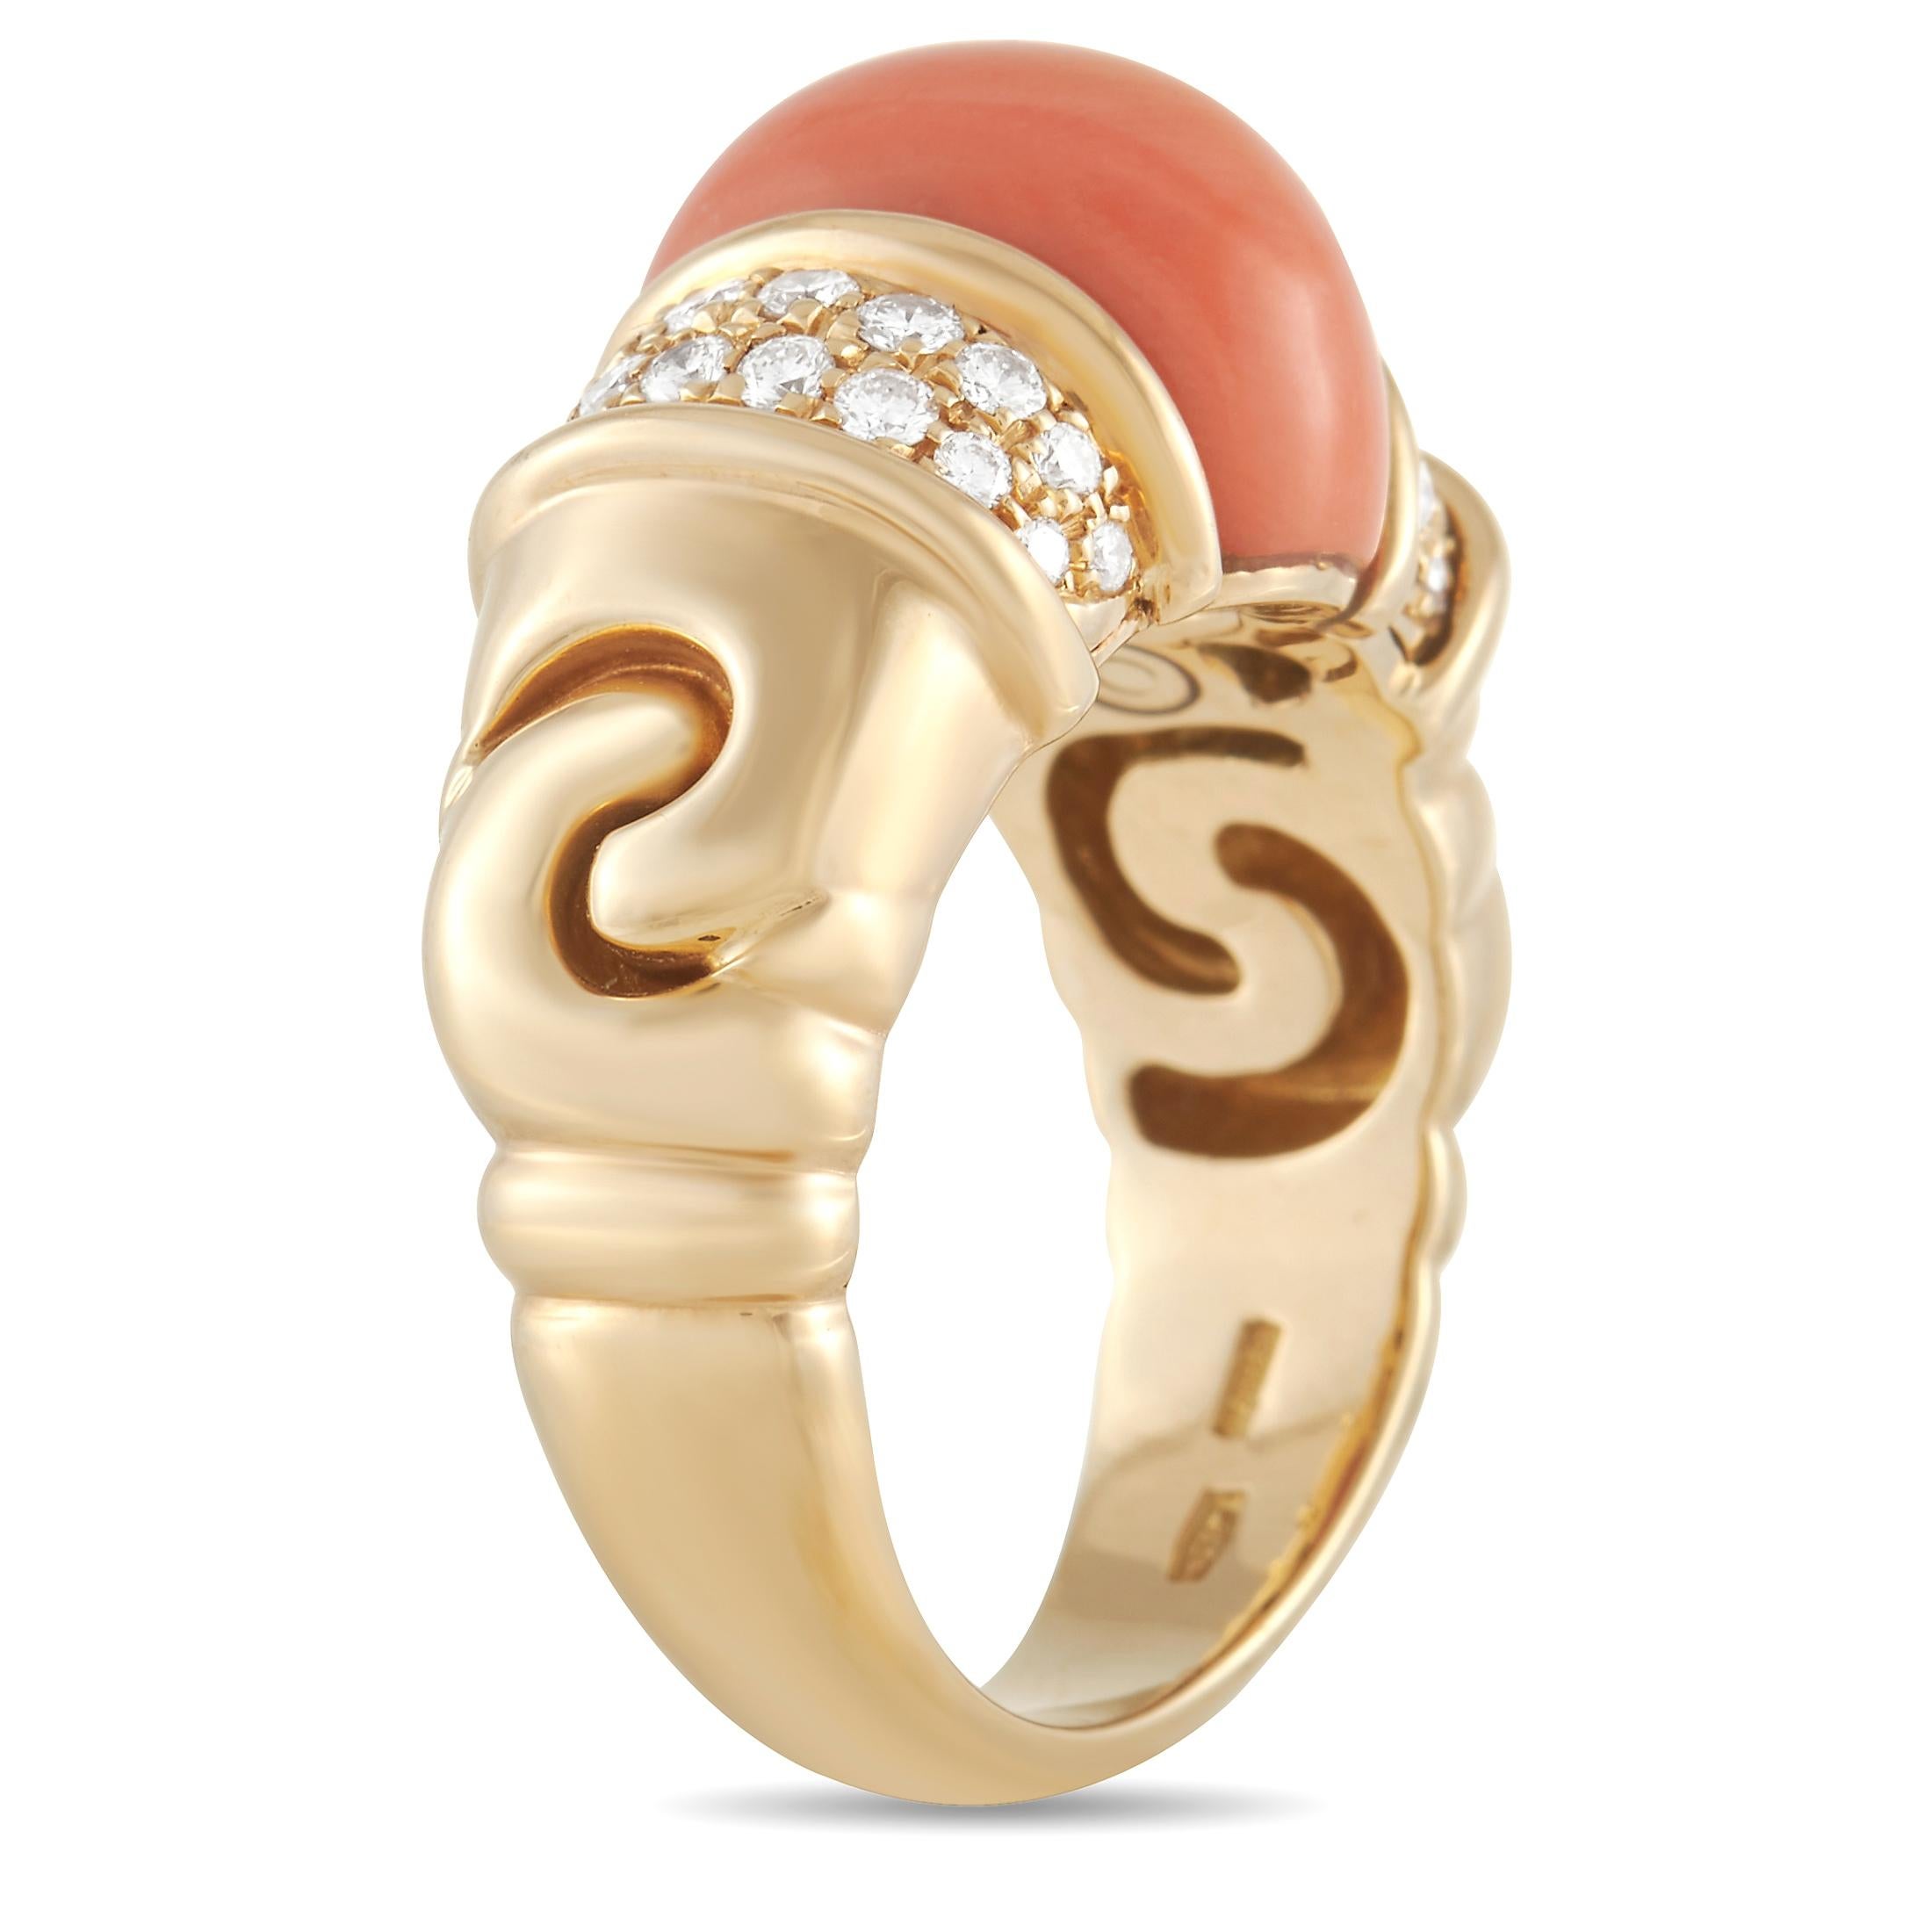 This breathtaking ring from luxury brand Bvlgari is poised to serve as an elegant addition to any jewelry collection. At the center of the stately 18K Yellow Gold setting, you’ll find an opulent coral gemstone. It’s flanked by a series of diamonds,